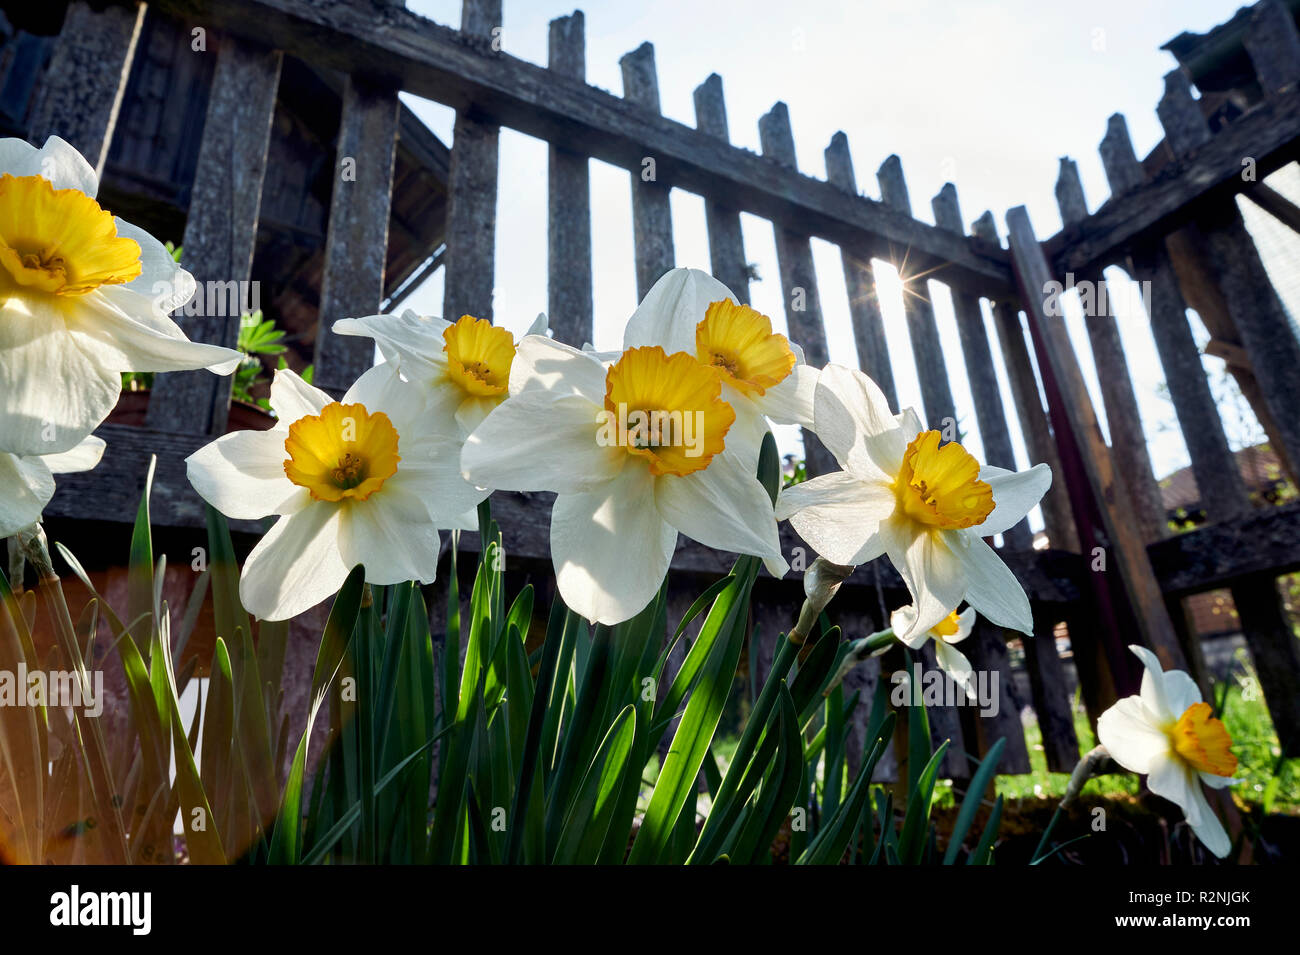 Daffodils in the back light in front of wooden garden fence and farmhouse Stock Photo